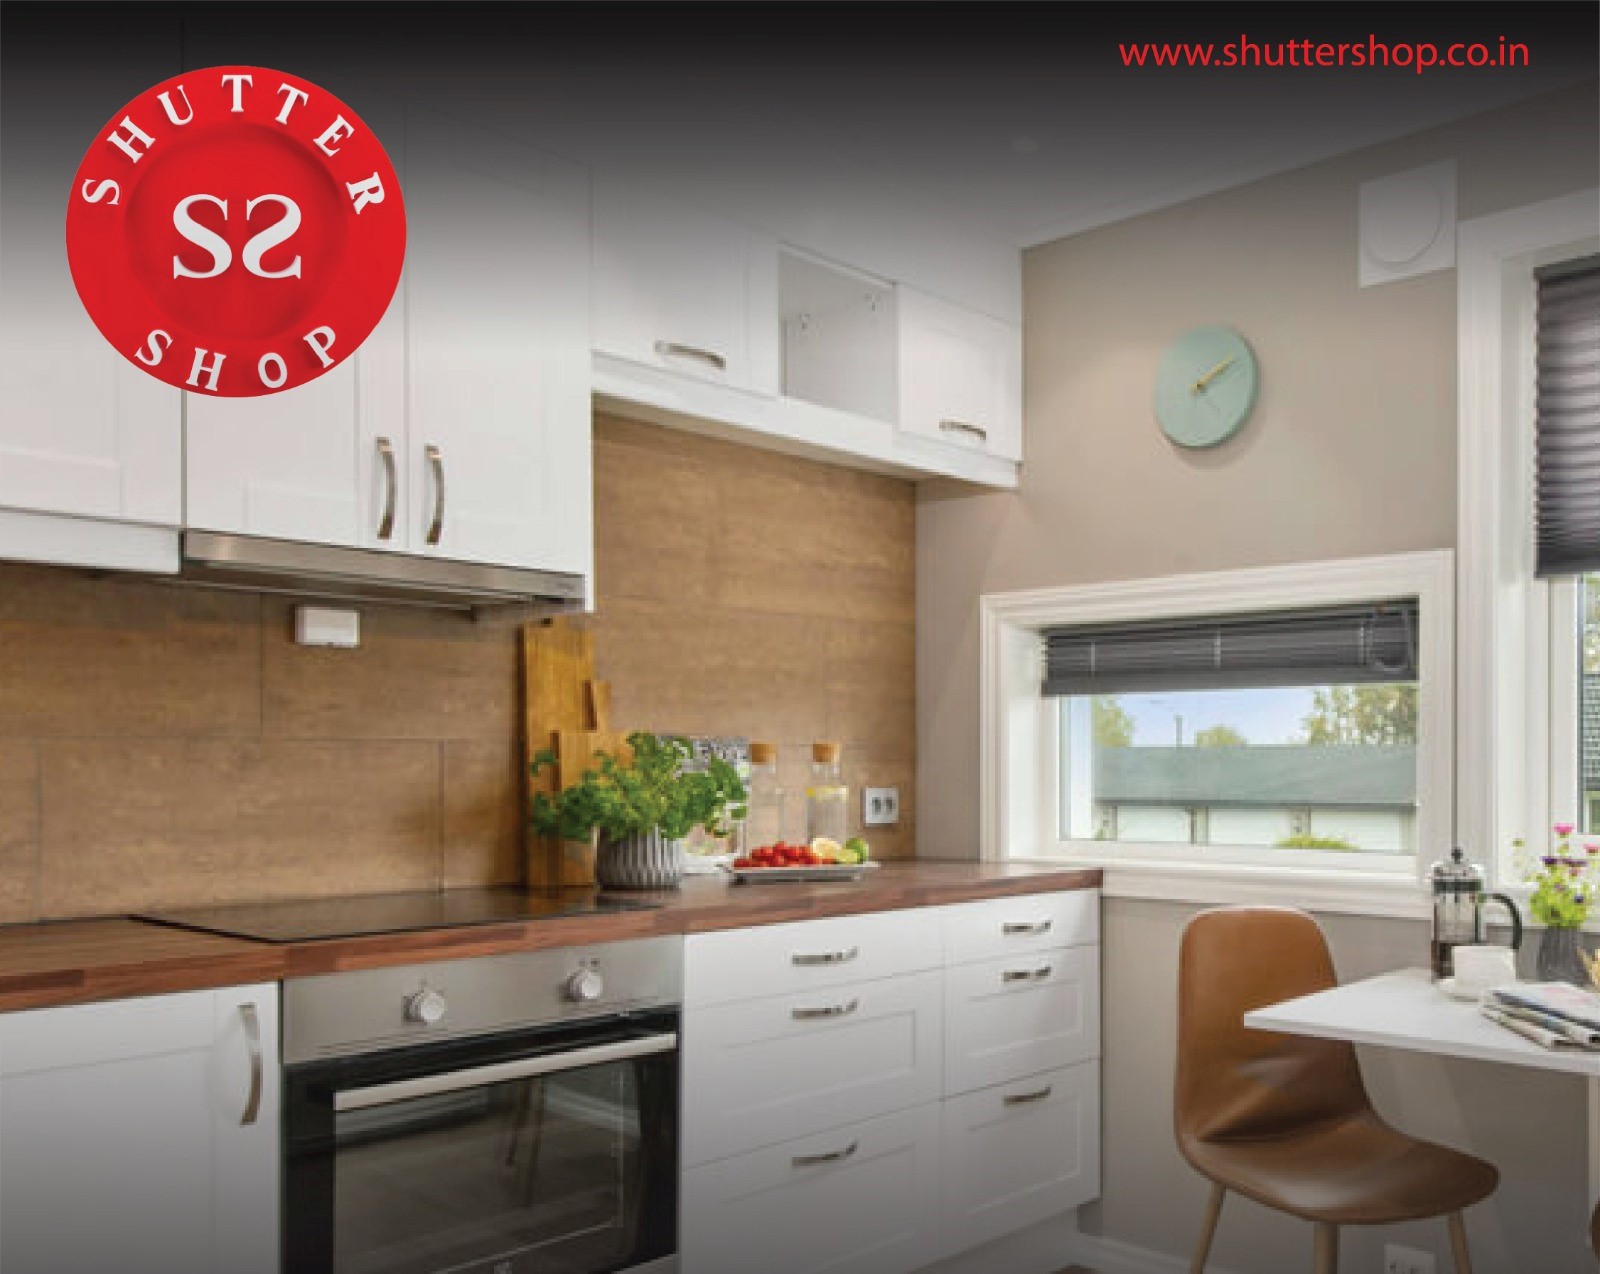 ShutterShop Interiors:Best Modular Shutters for Kitchen and Wardrobes in Bangalore,offer Modular Kitchen & Floor to Ceiling Wardrobes Shutter & Cabinets interiors.